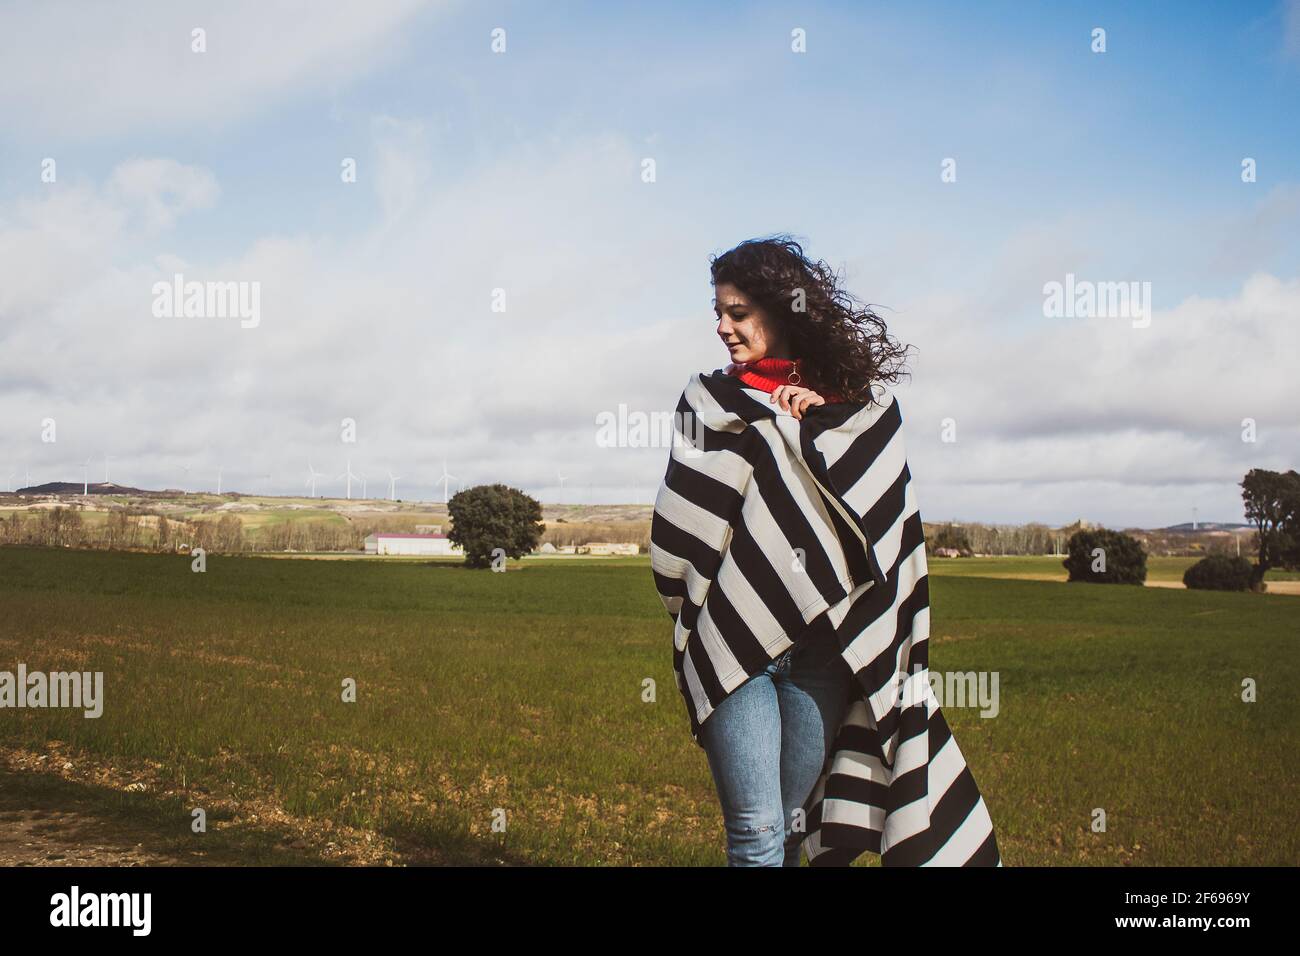 young woman in the field with striped blanket moving in the wind Stock Photo